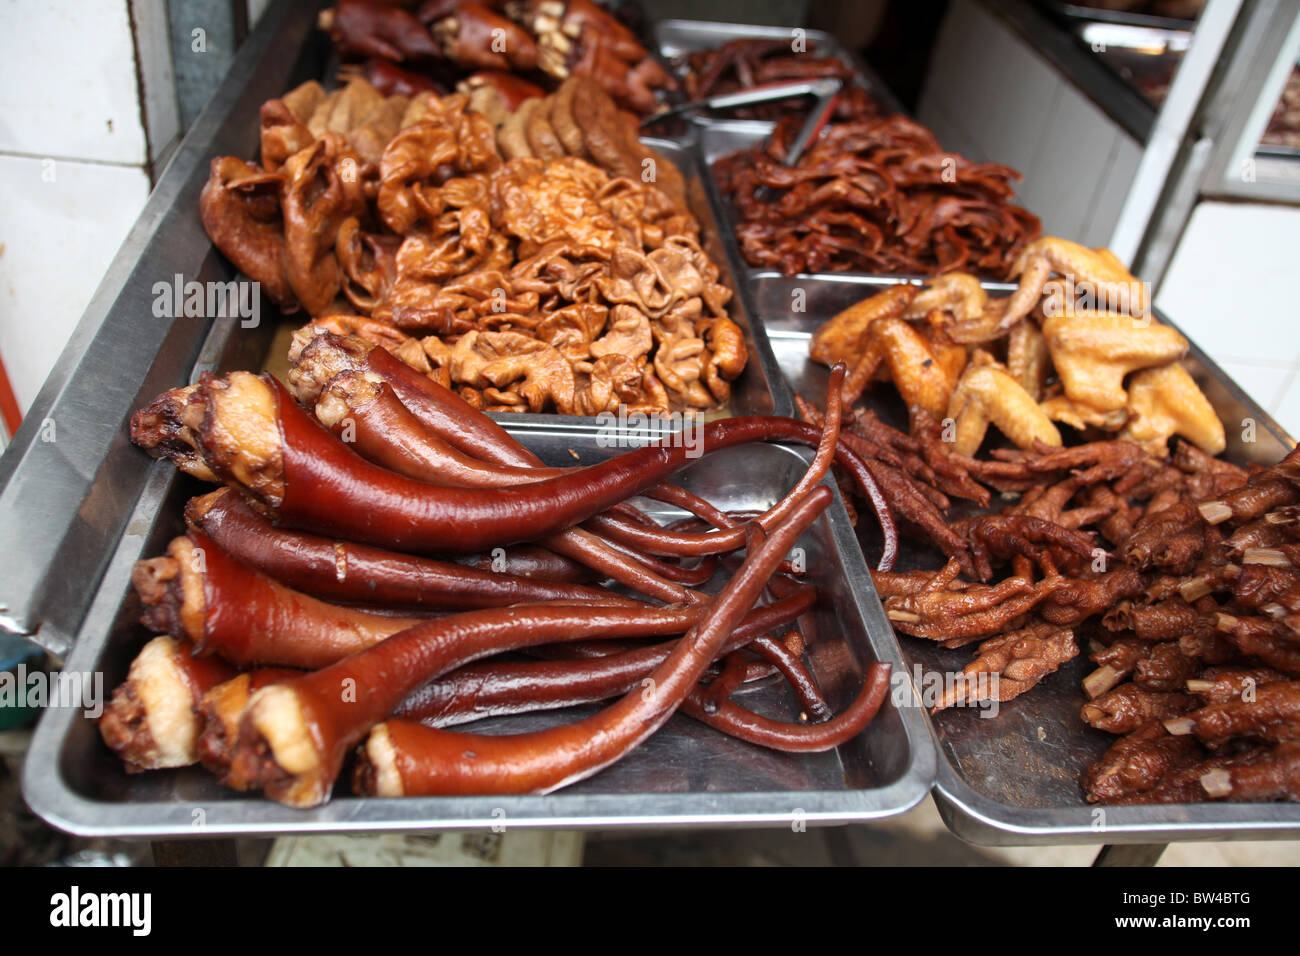 Pigs tails and chicken feet on display at the large local food market in Kunming, Yunnan Province, China. Stock Photo